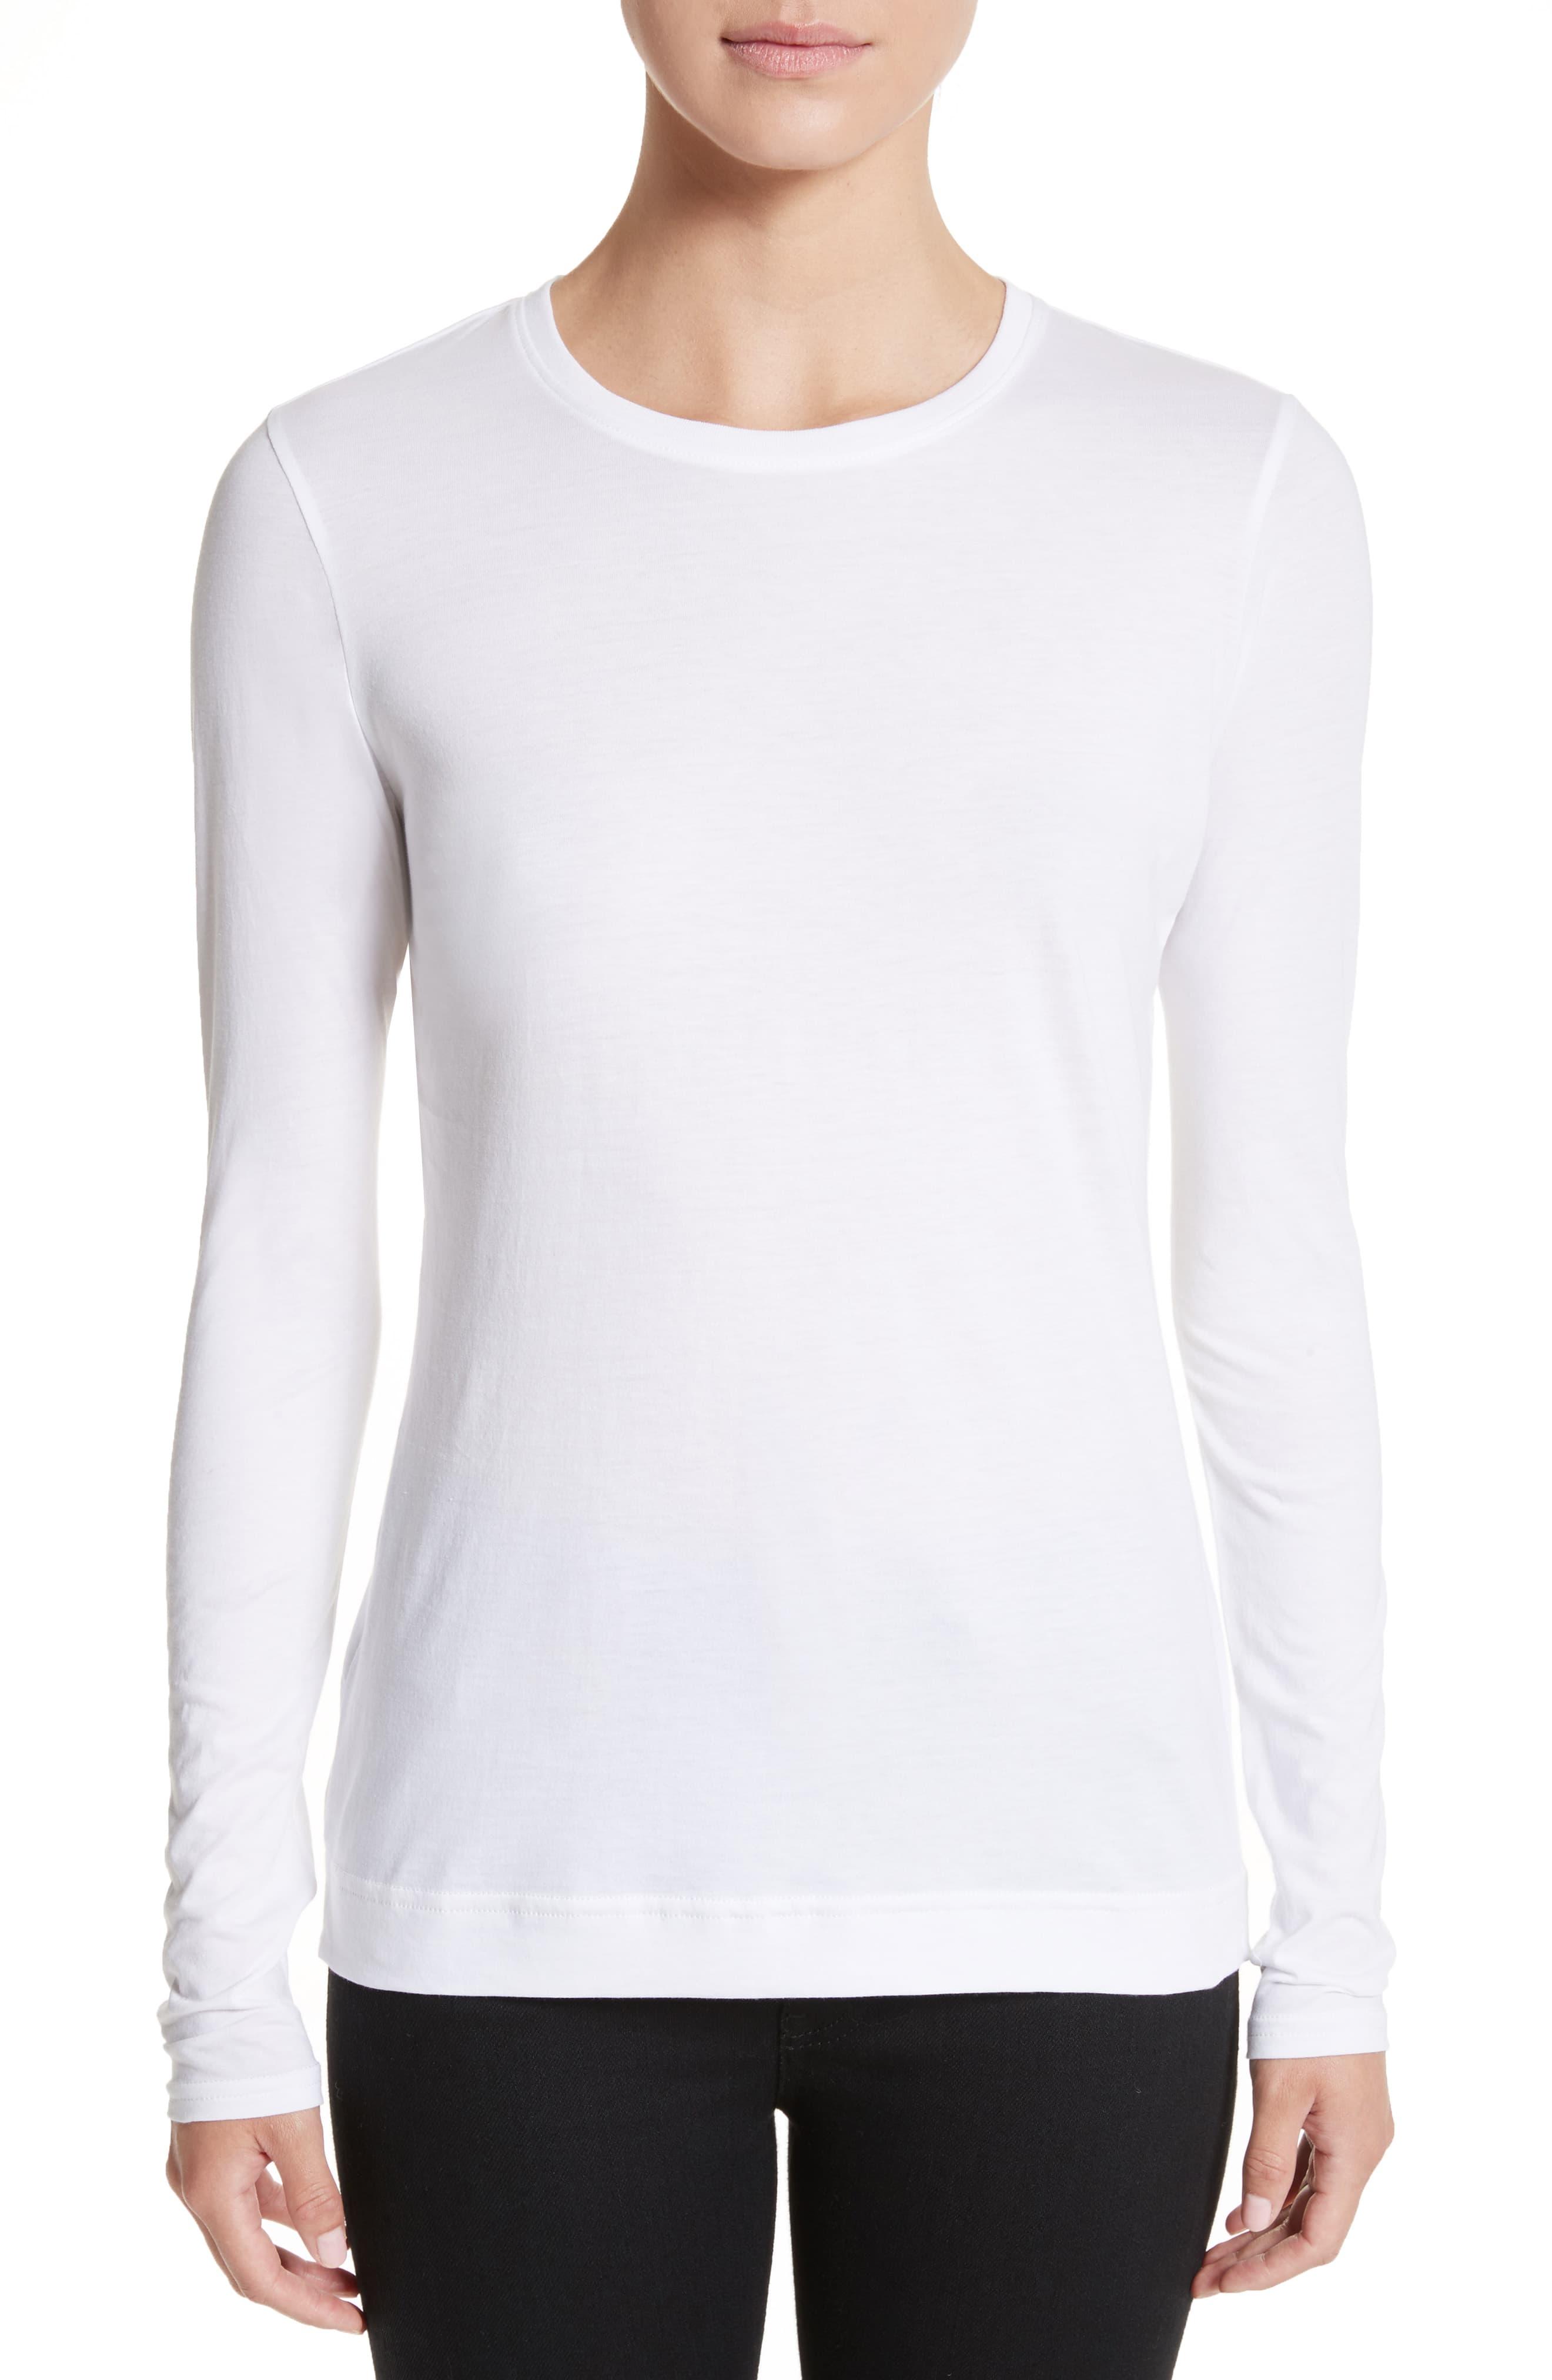 Adam Lippes Cotton Long Sleeve Crewneck T-shirt in White - Lyst